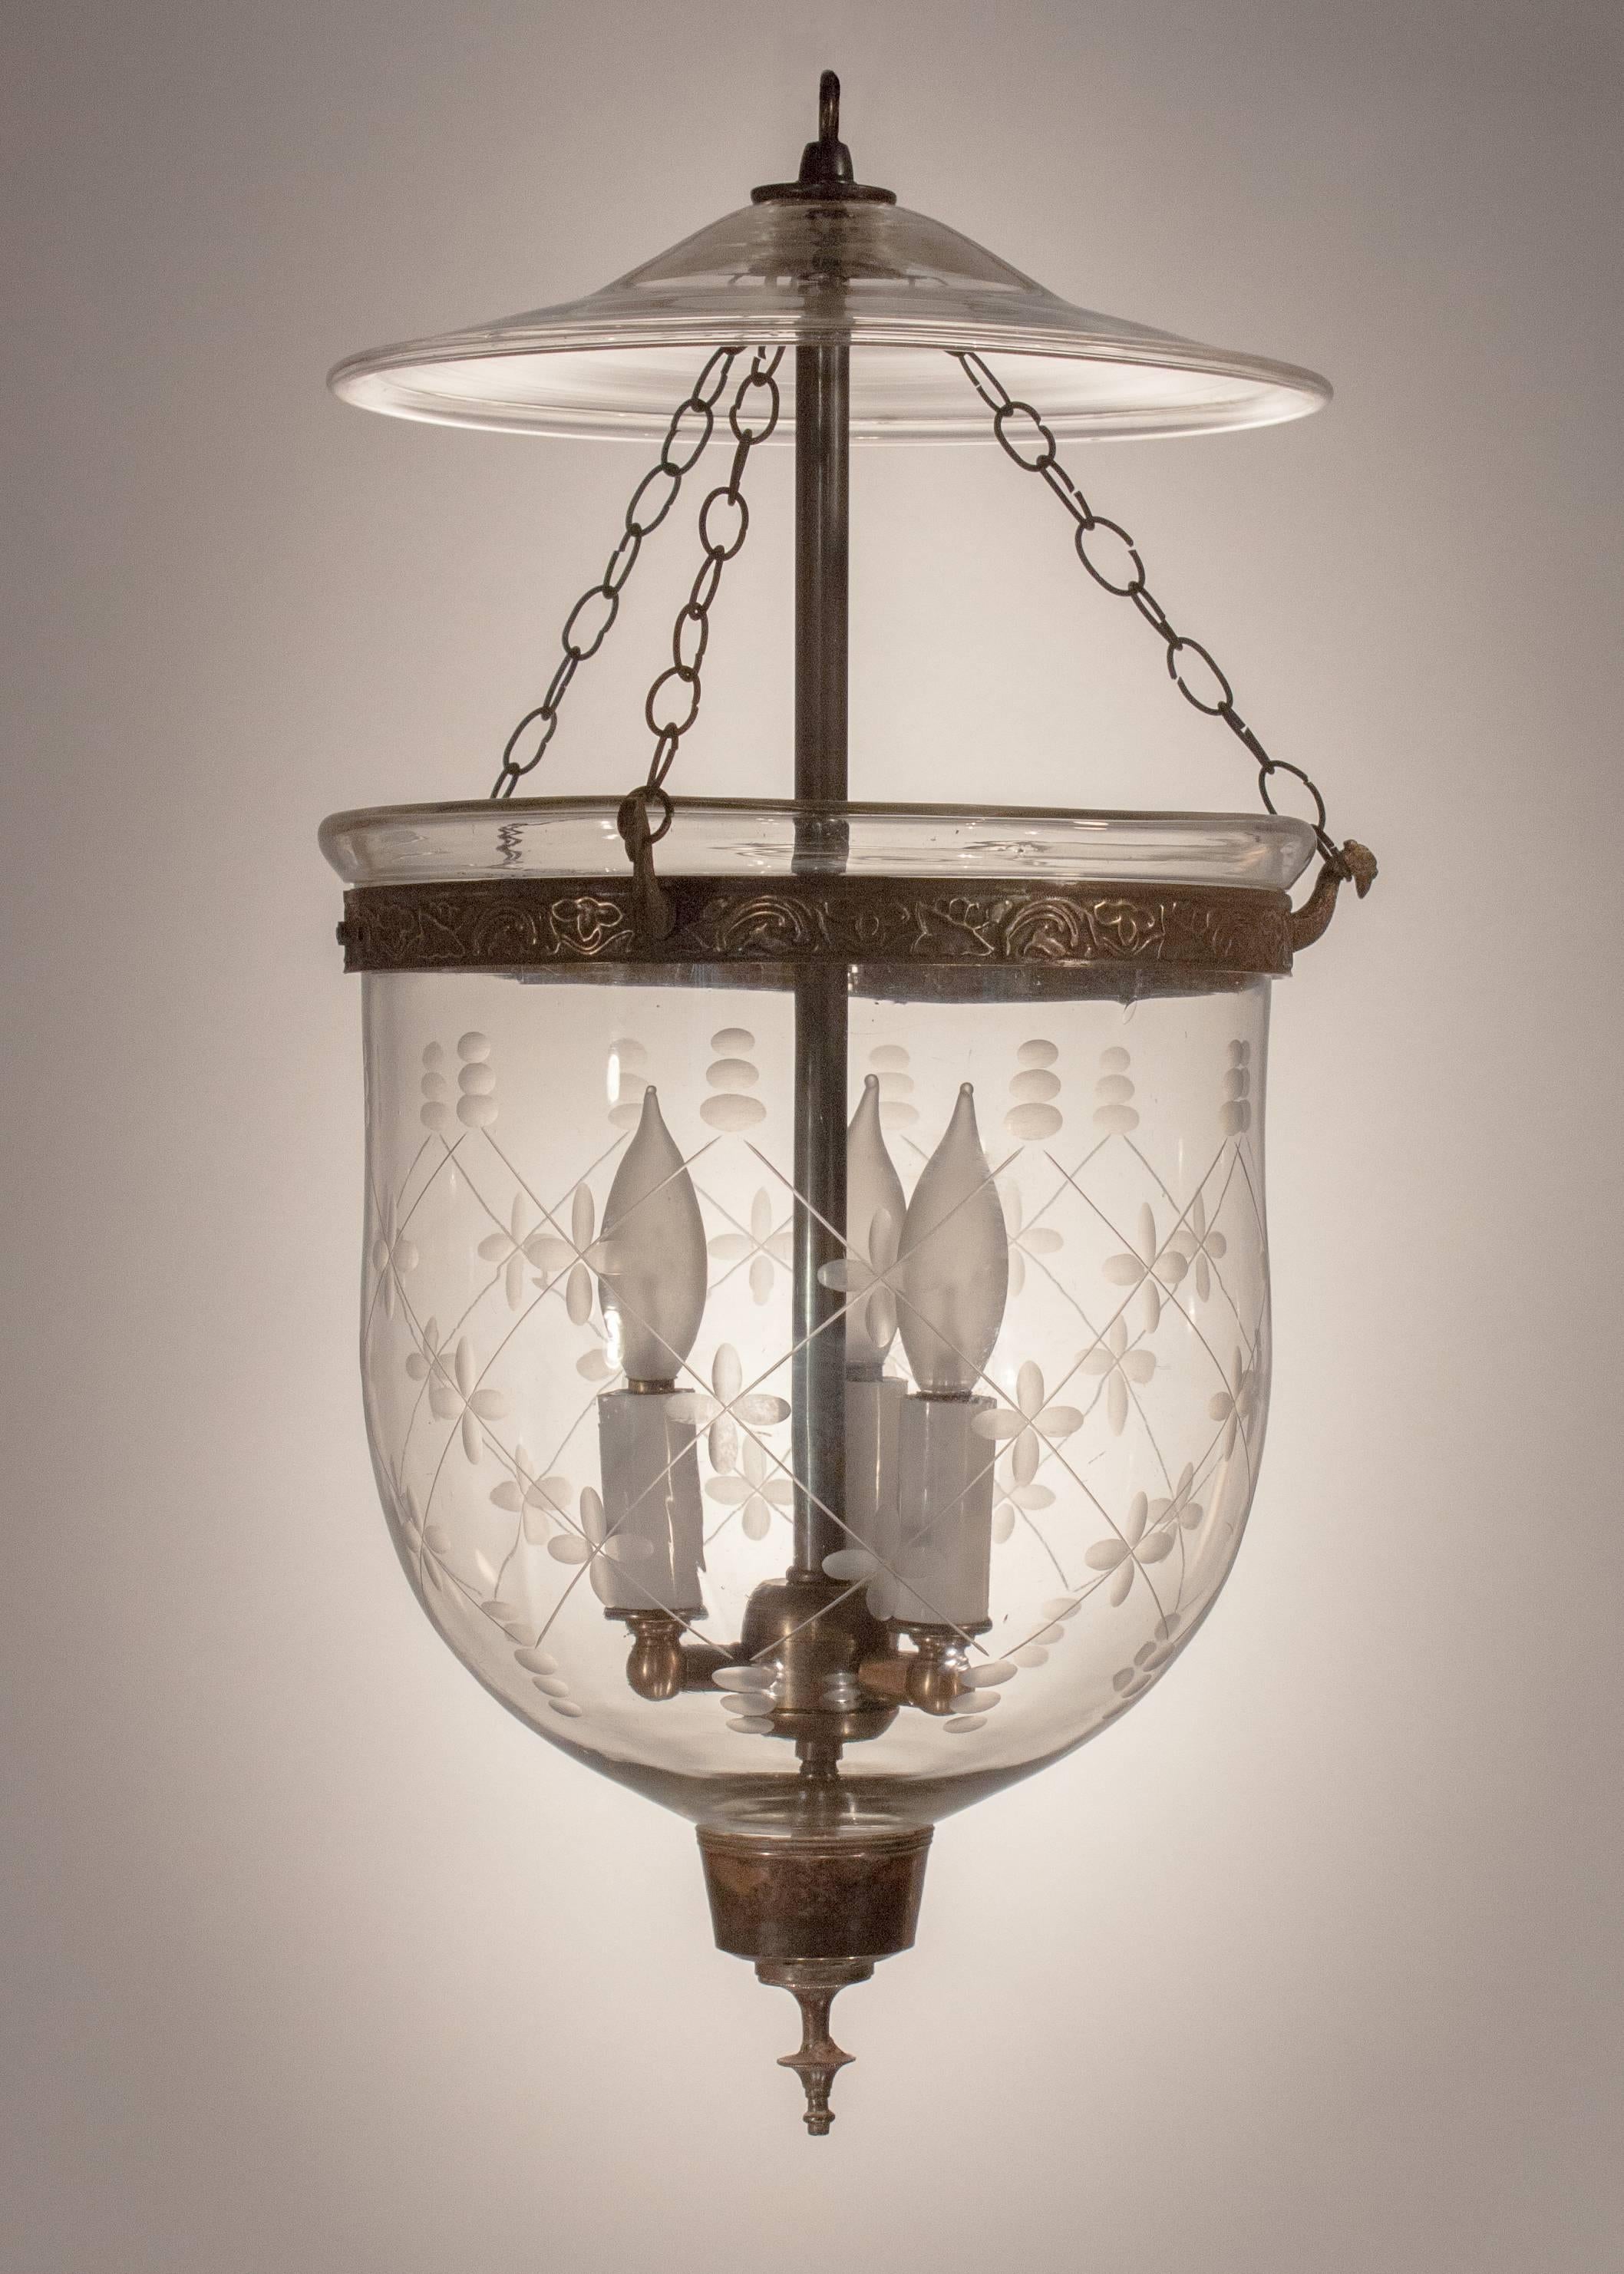 Classic English bell jar lantern, circa 1860, with lovely proportions and a complementary etched trellis pattern. The handblown glass is Fine quality, with desirable swirls and air bubbles. The hall lantern has its original smoke bell and unadorned